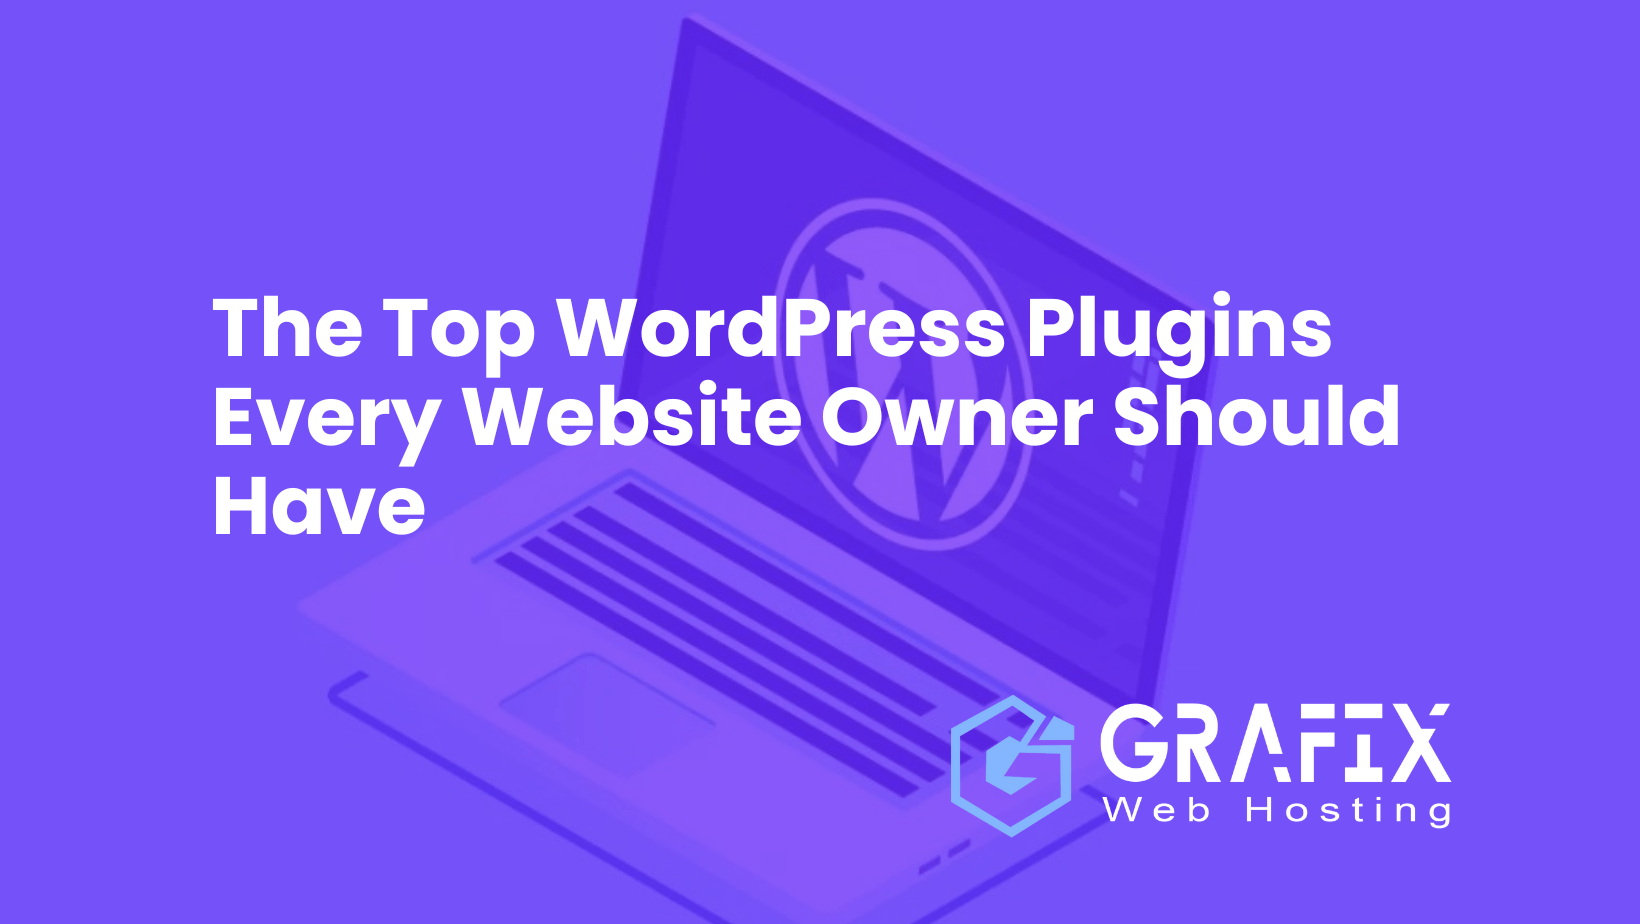 The Top WordPress Plugins Every Website Owner Should Have